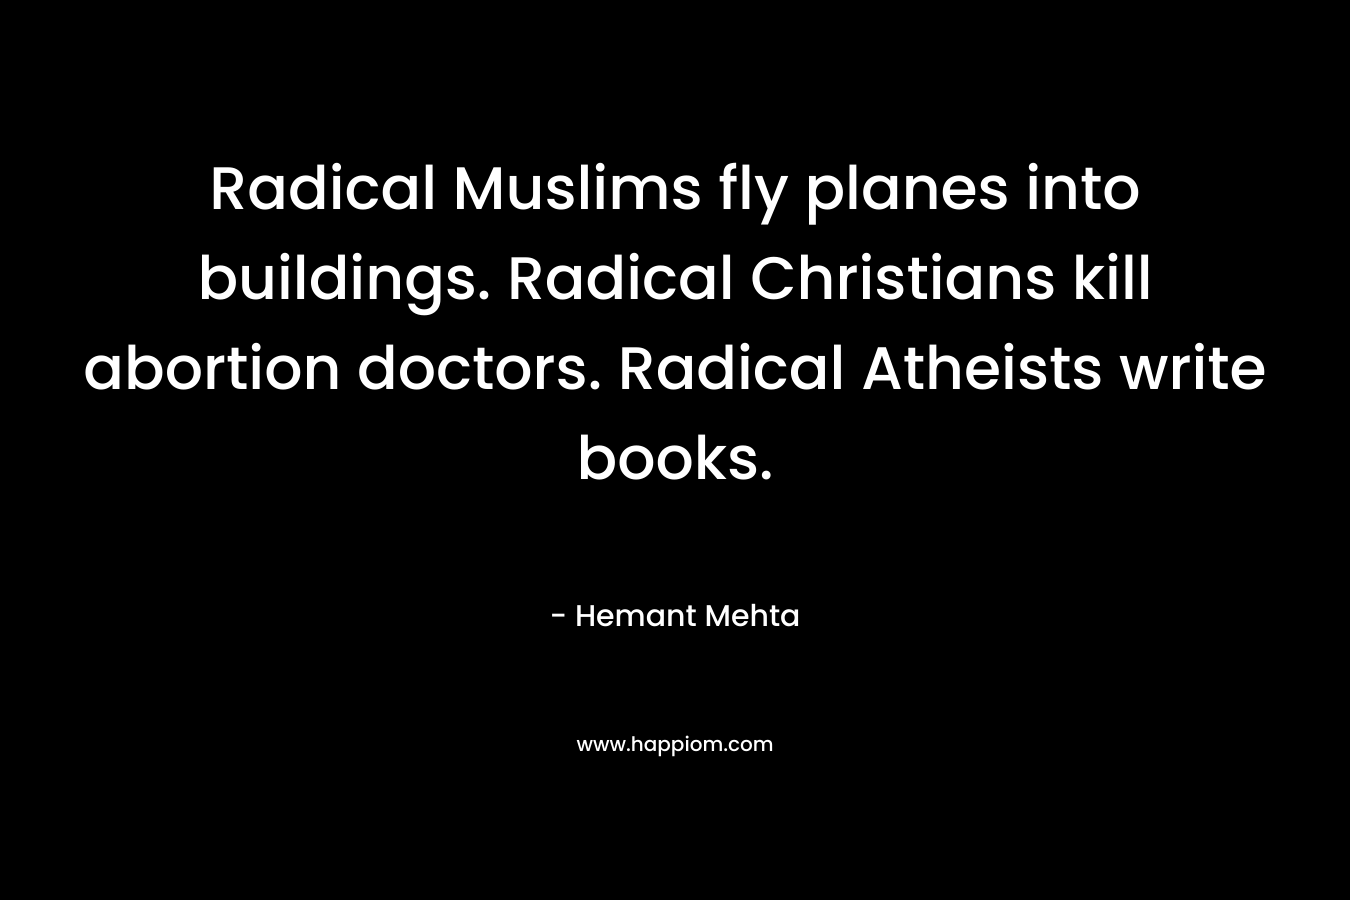 Radical Muslims fly planes into buildings. Radical Christians kill abortion doctors. Radical Atheists write books.